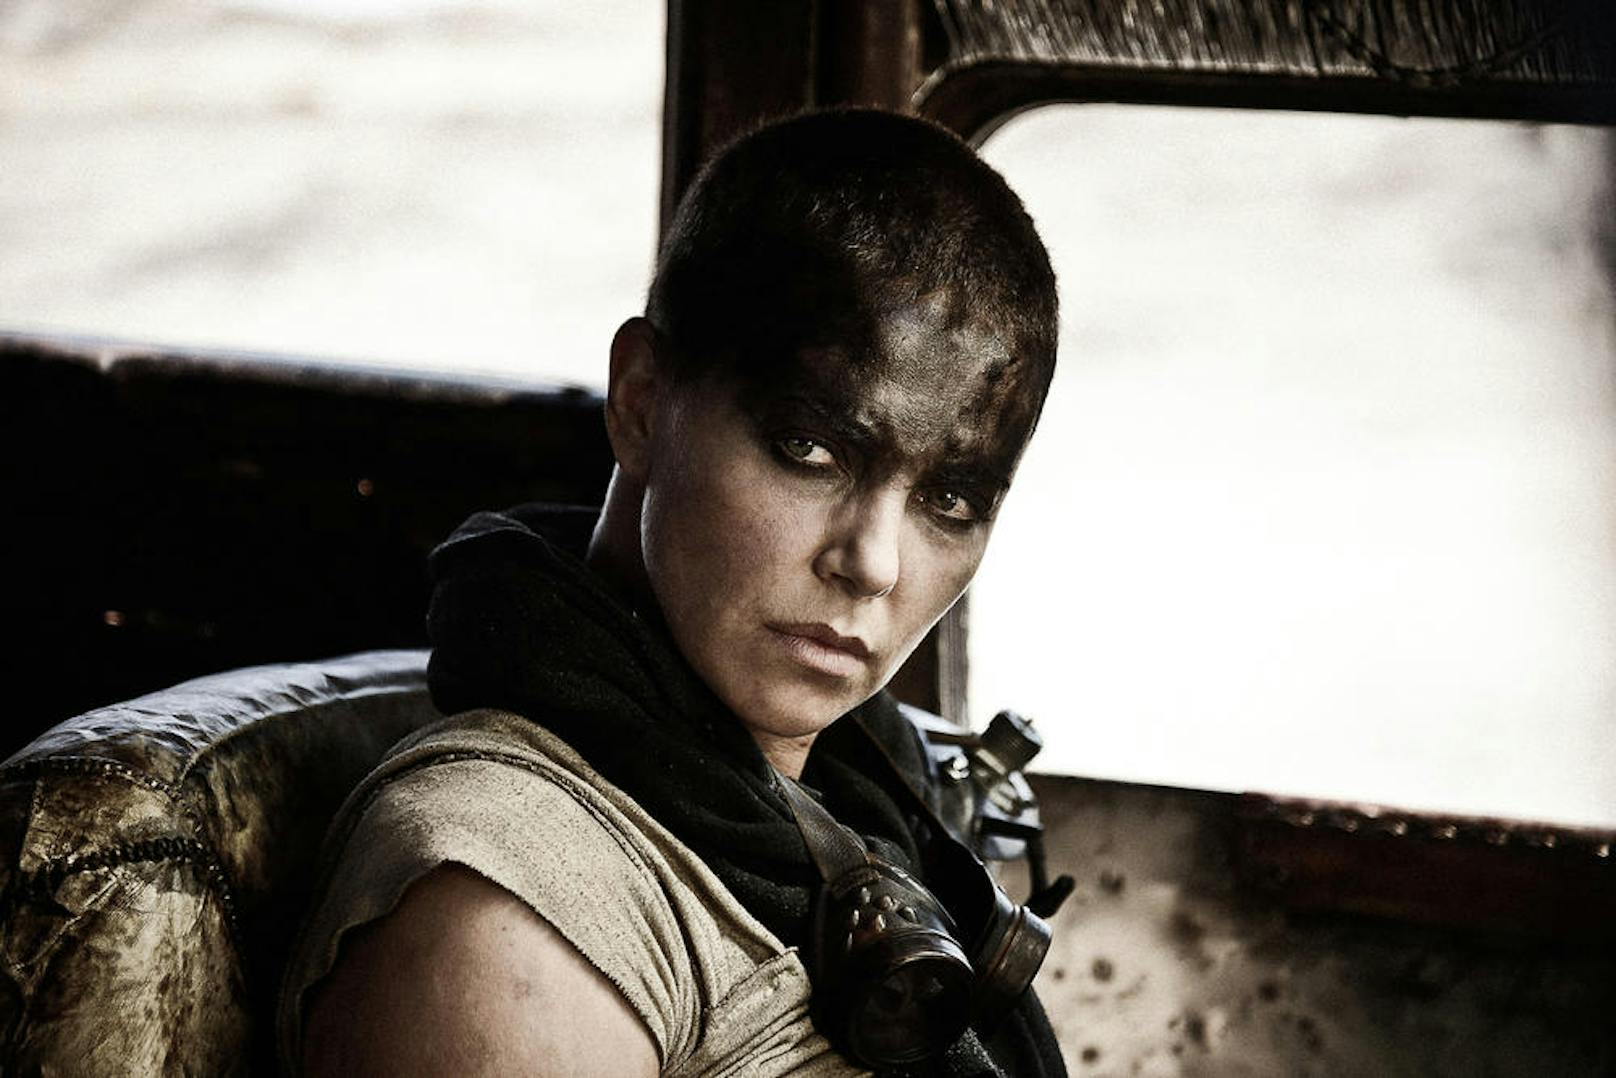 Charlize Theron in "Mad Max: Fury Road"